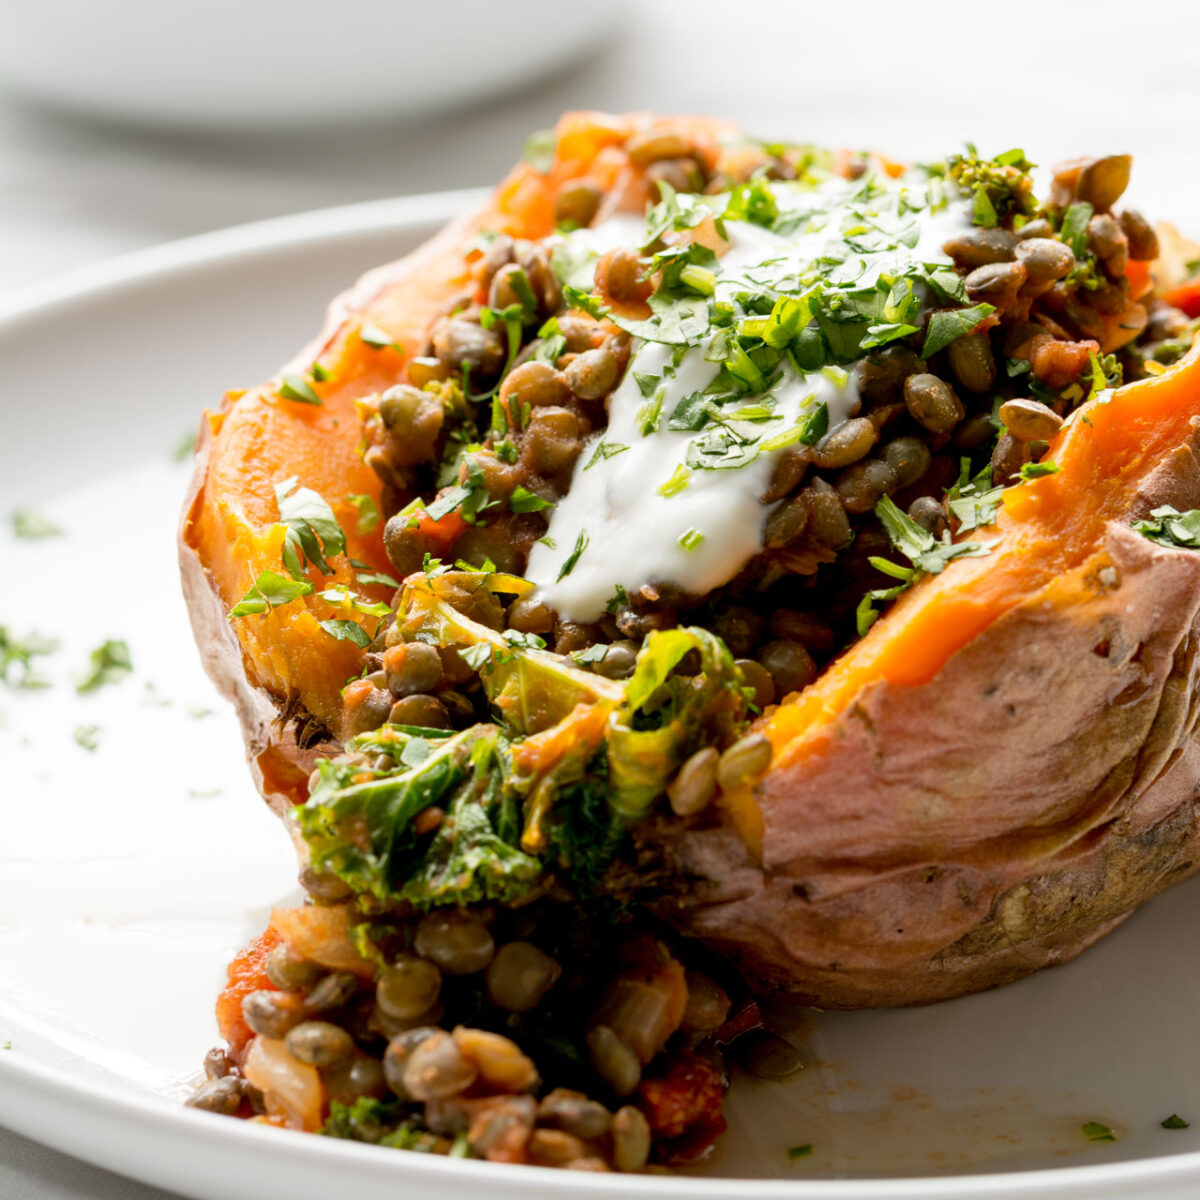 Sweet Potato stuffed with lentils, kale and sun dried tomatoes on a white plate with some contents spilling out.